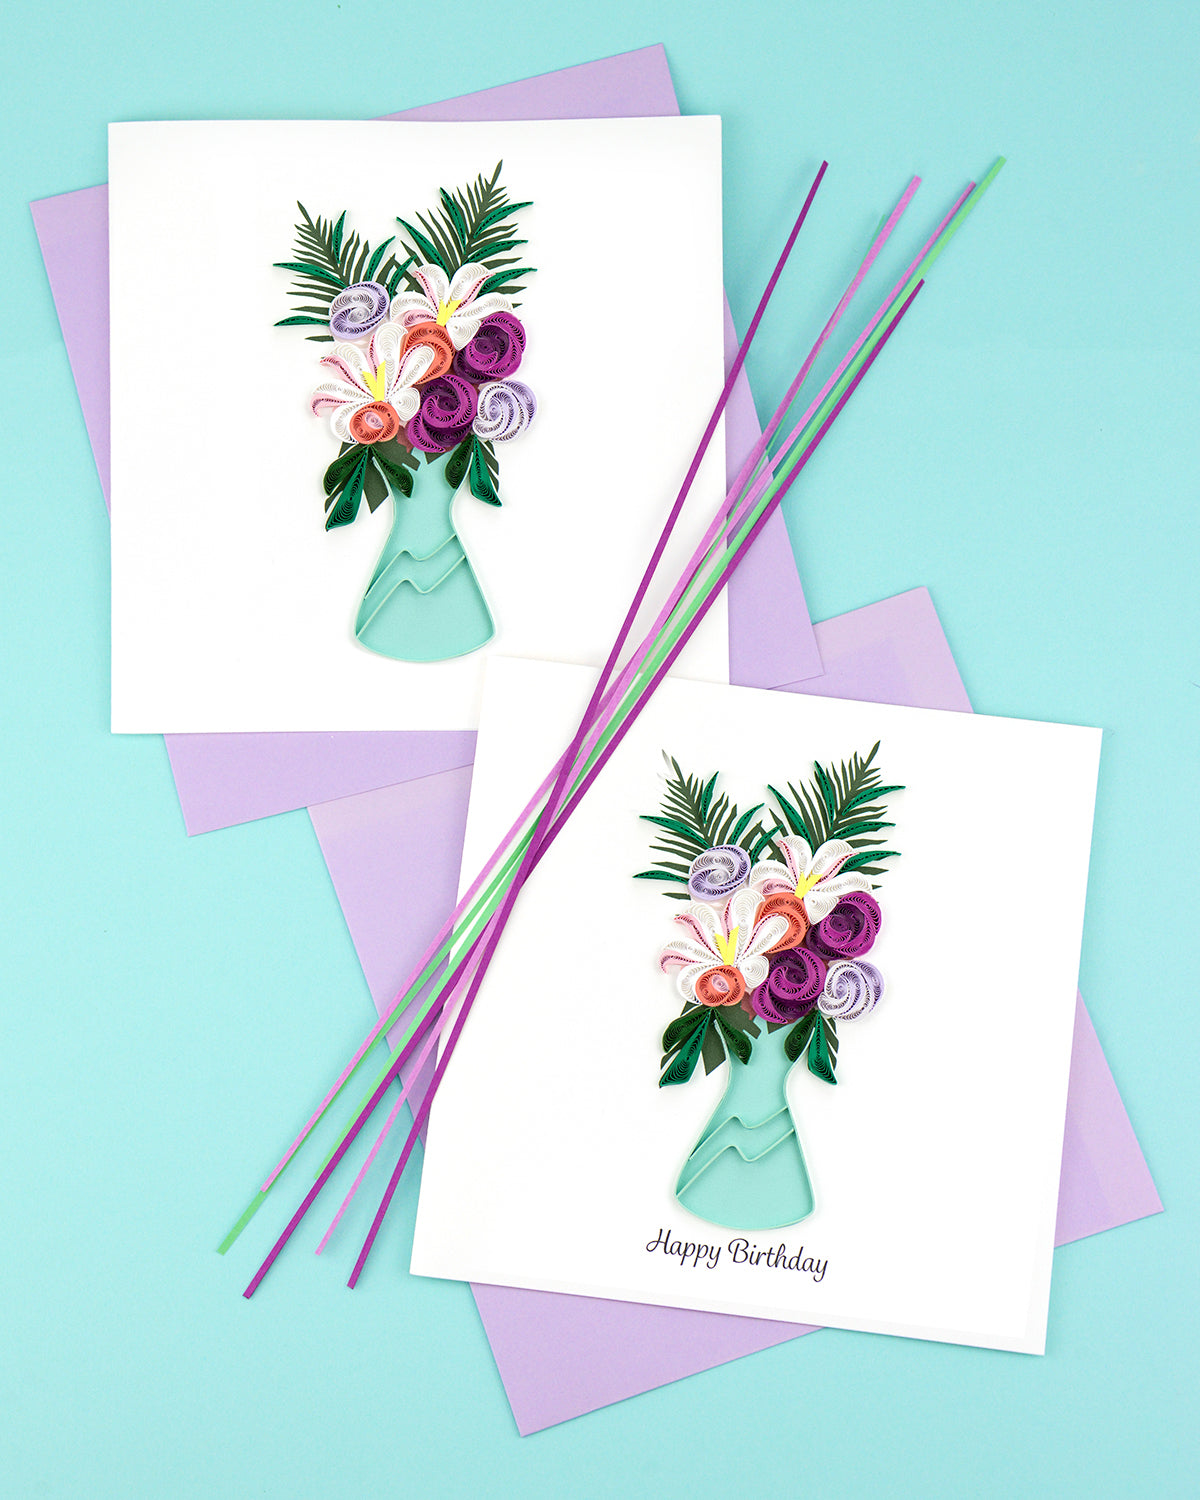 Quilling Flowers In A Vase Bloomin' Fun! Hand-Finished Art Greeting Card